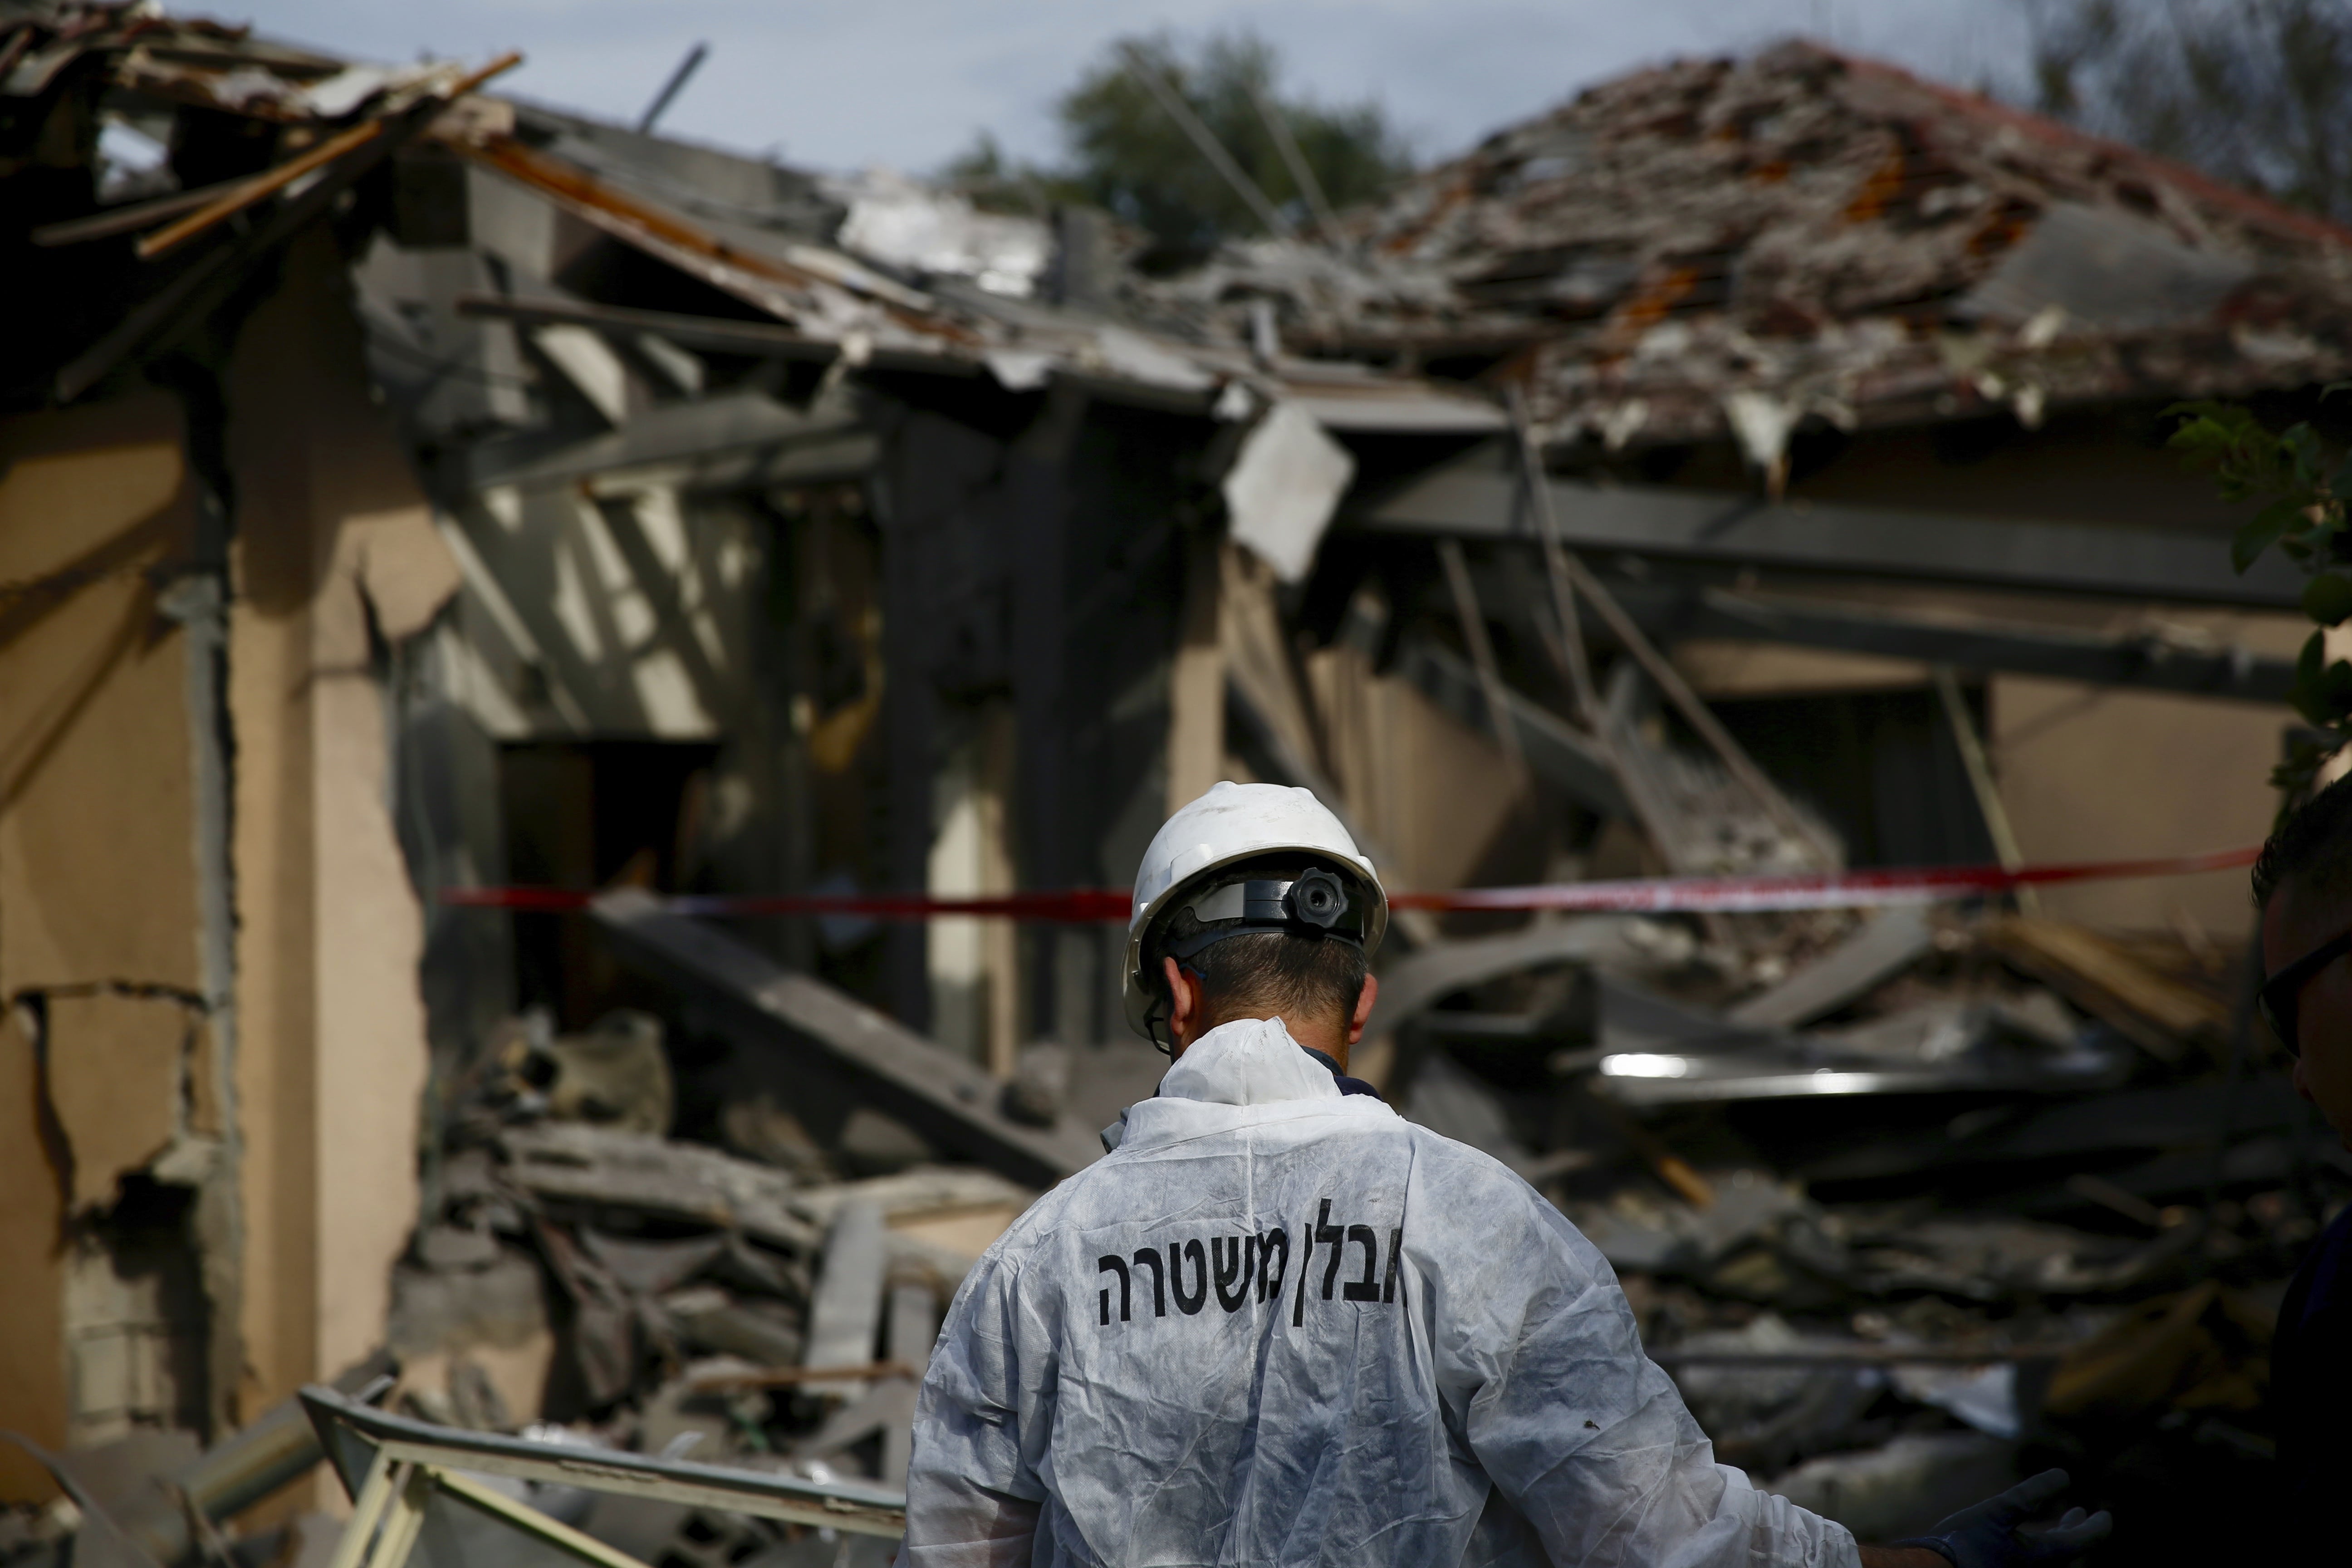 An Israeli police officer inspects the damage to a house hit by a rocket in Mishmeret, central Israel, Monday, March 25, 2019. An early morning rocket from the Gaza Strip struck a house in central Israel on Monday, wounding several people, including one moderately, an Israeli rescue service said, in an eruption of violence that could set off another round of violence shortly before the Israeli election.